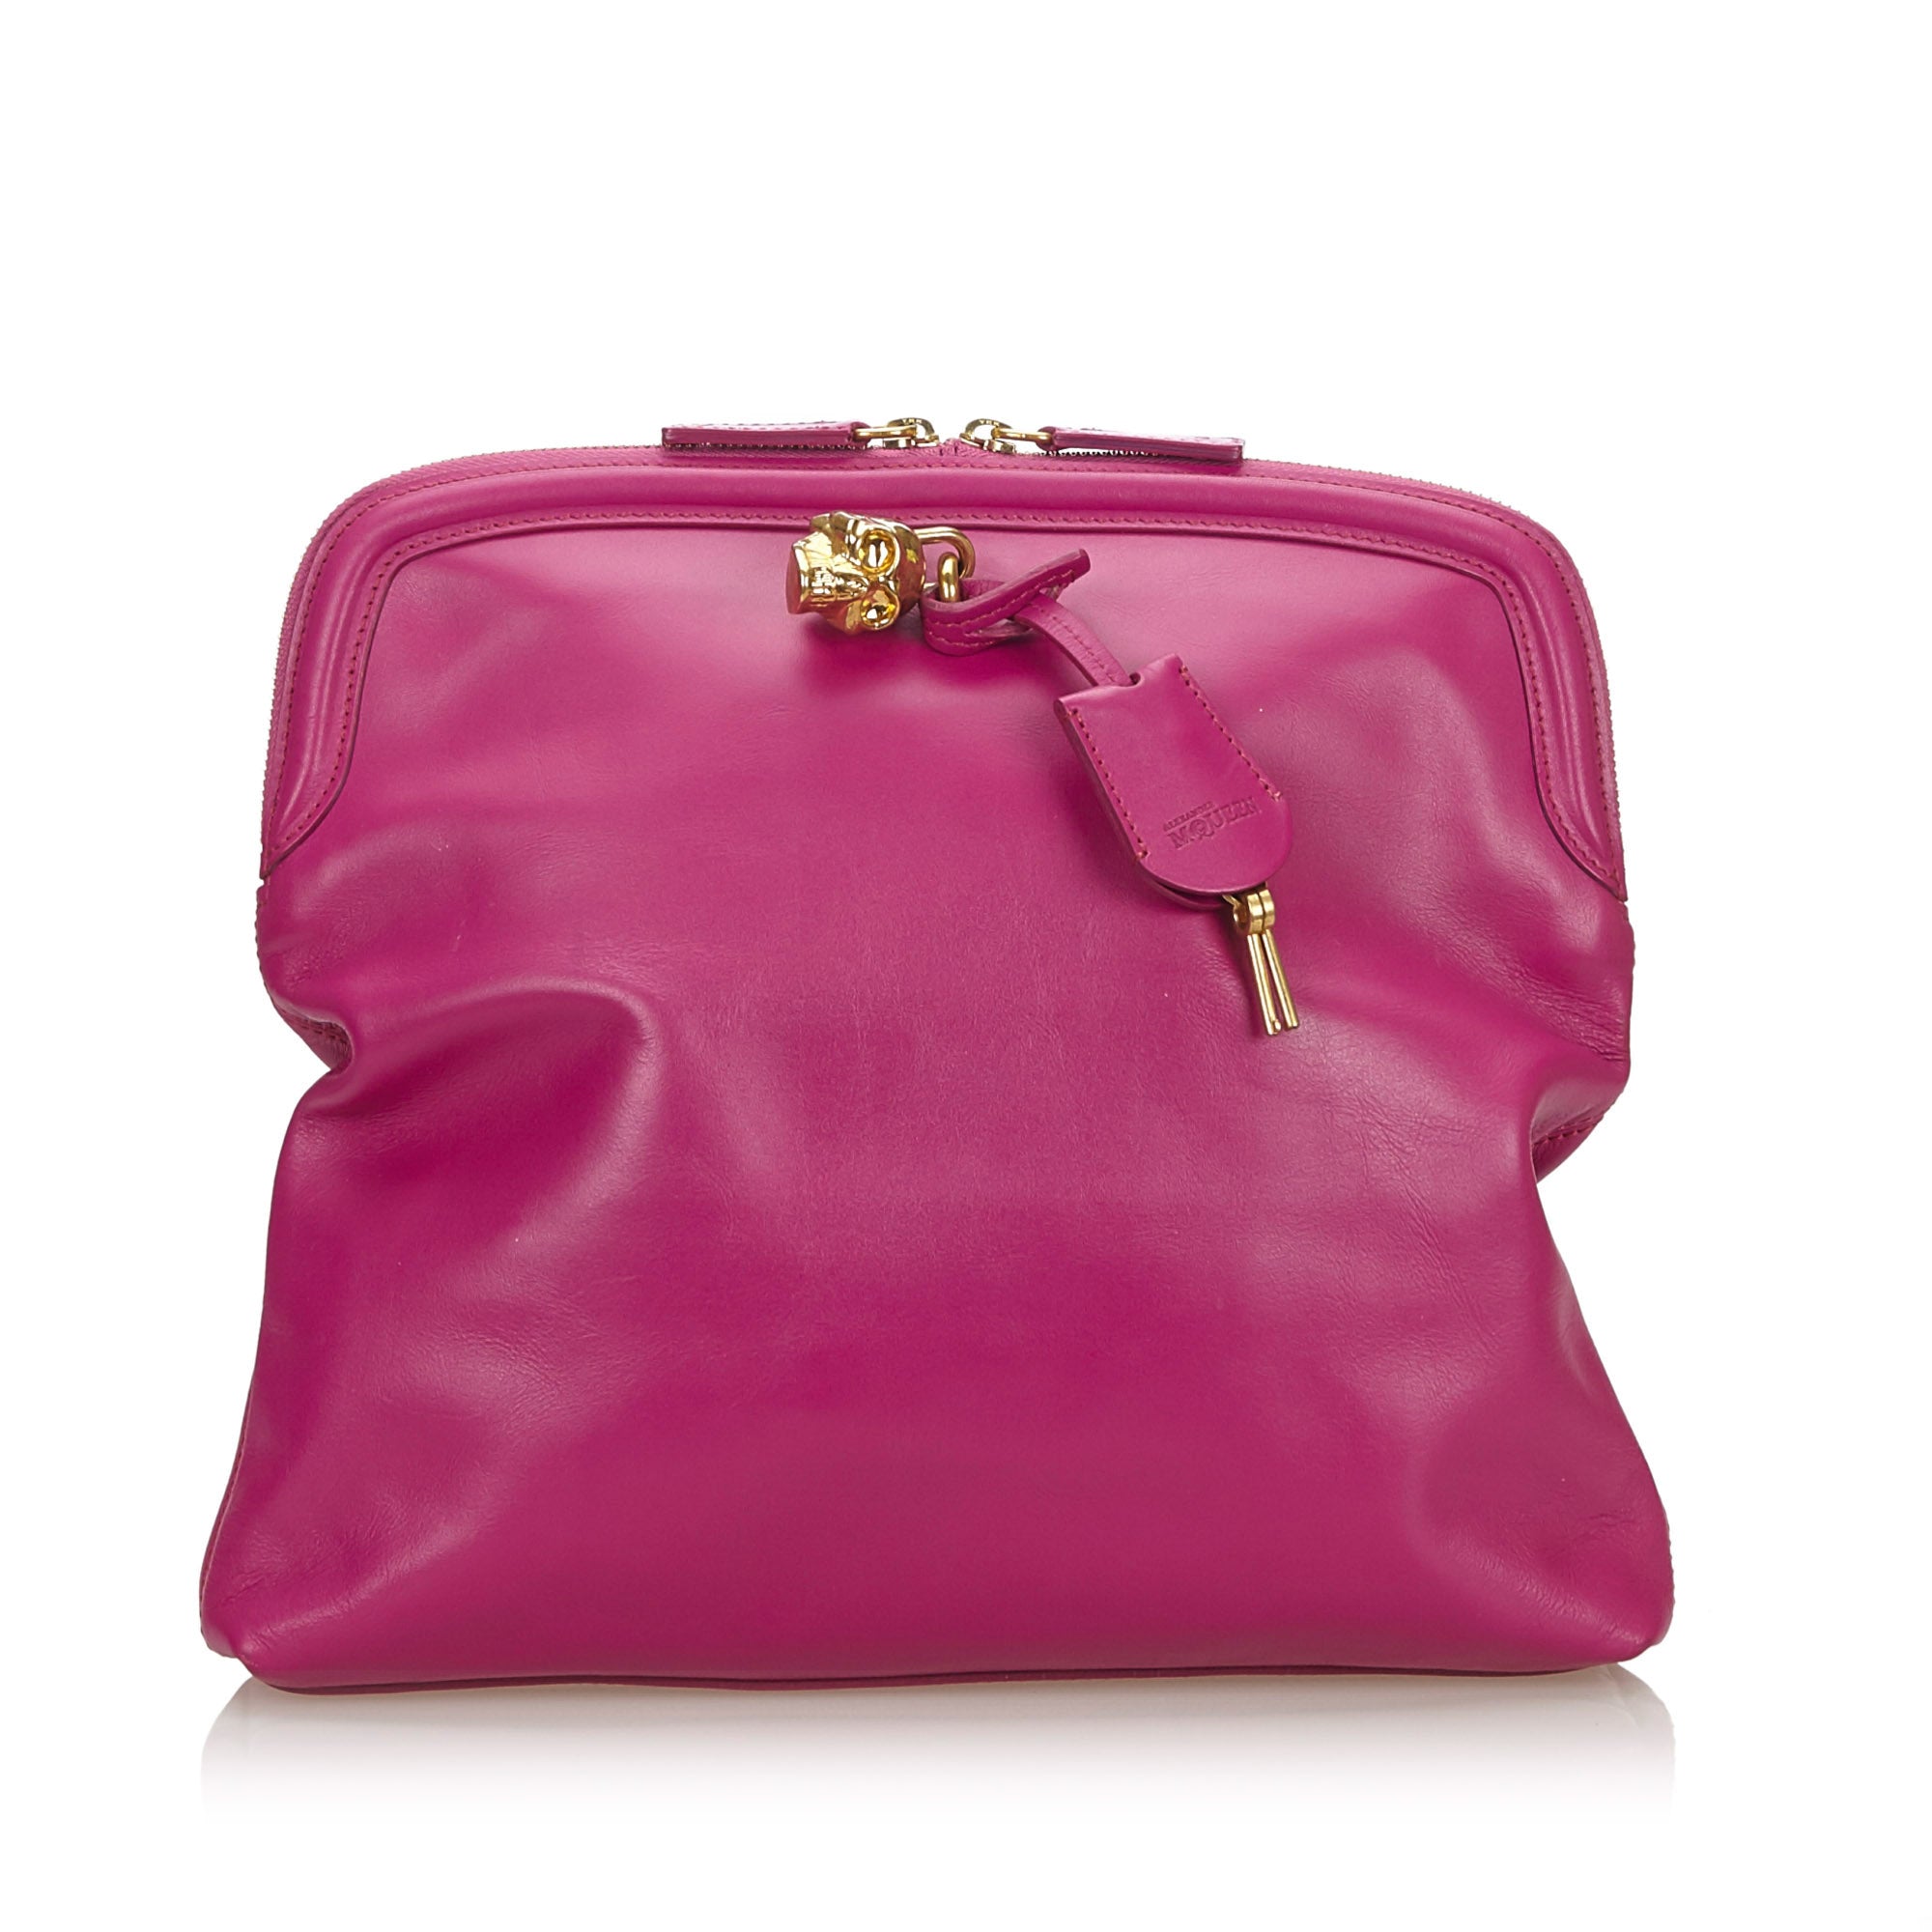 Buy & Consign Authentic Alexander Mcqueen Skull Padlock Fold-Over Clutch Bag at The Plush Posh